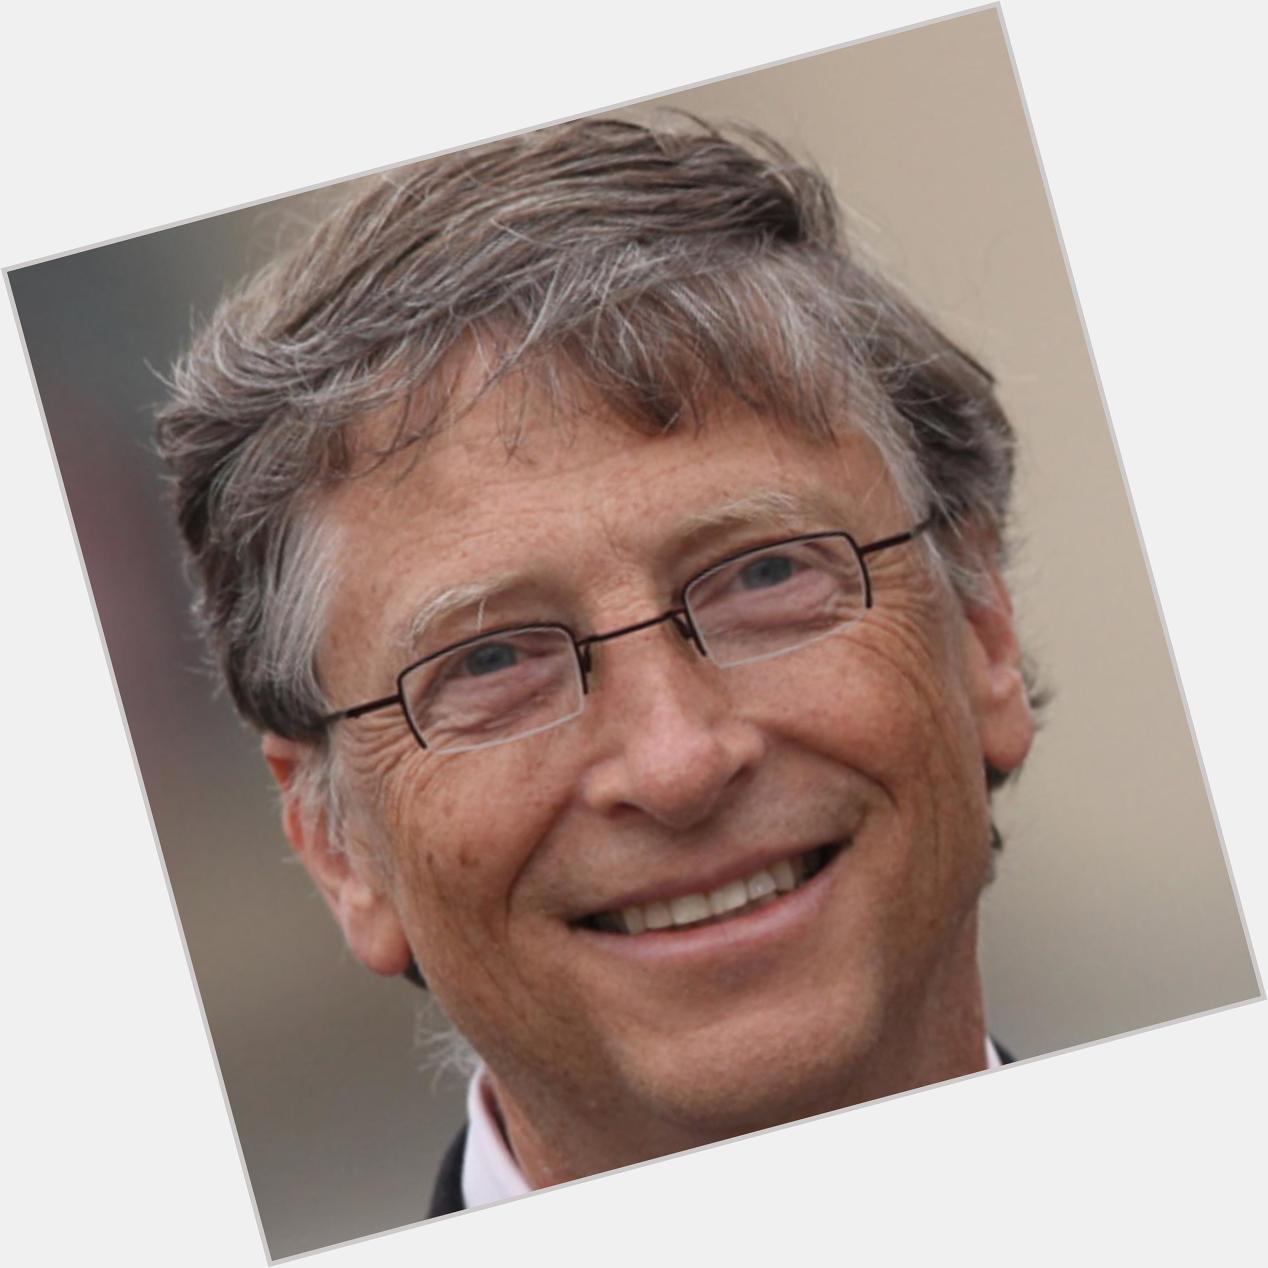 Happy 62nd birthday, Bill Gates! Why he had his computer privileges revoked in high school  